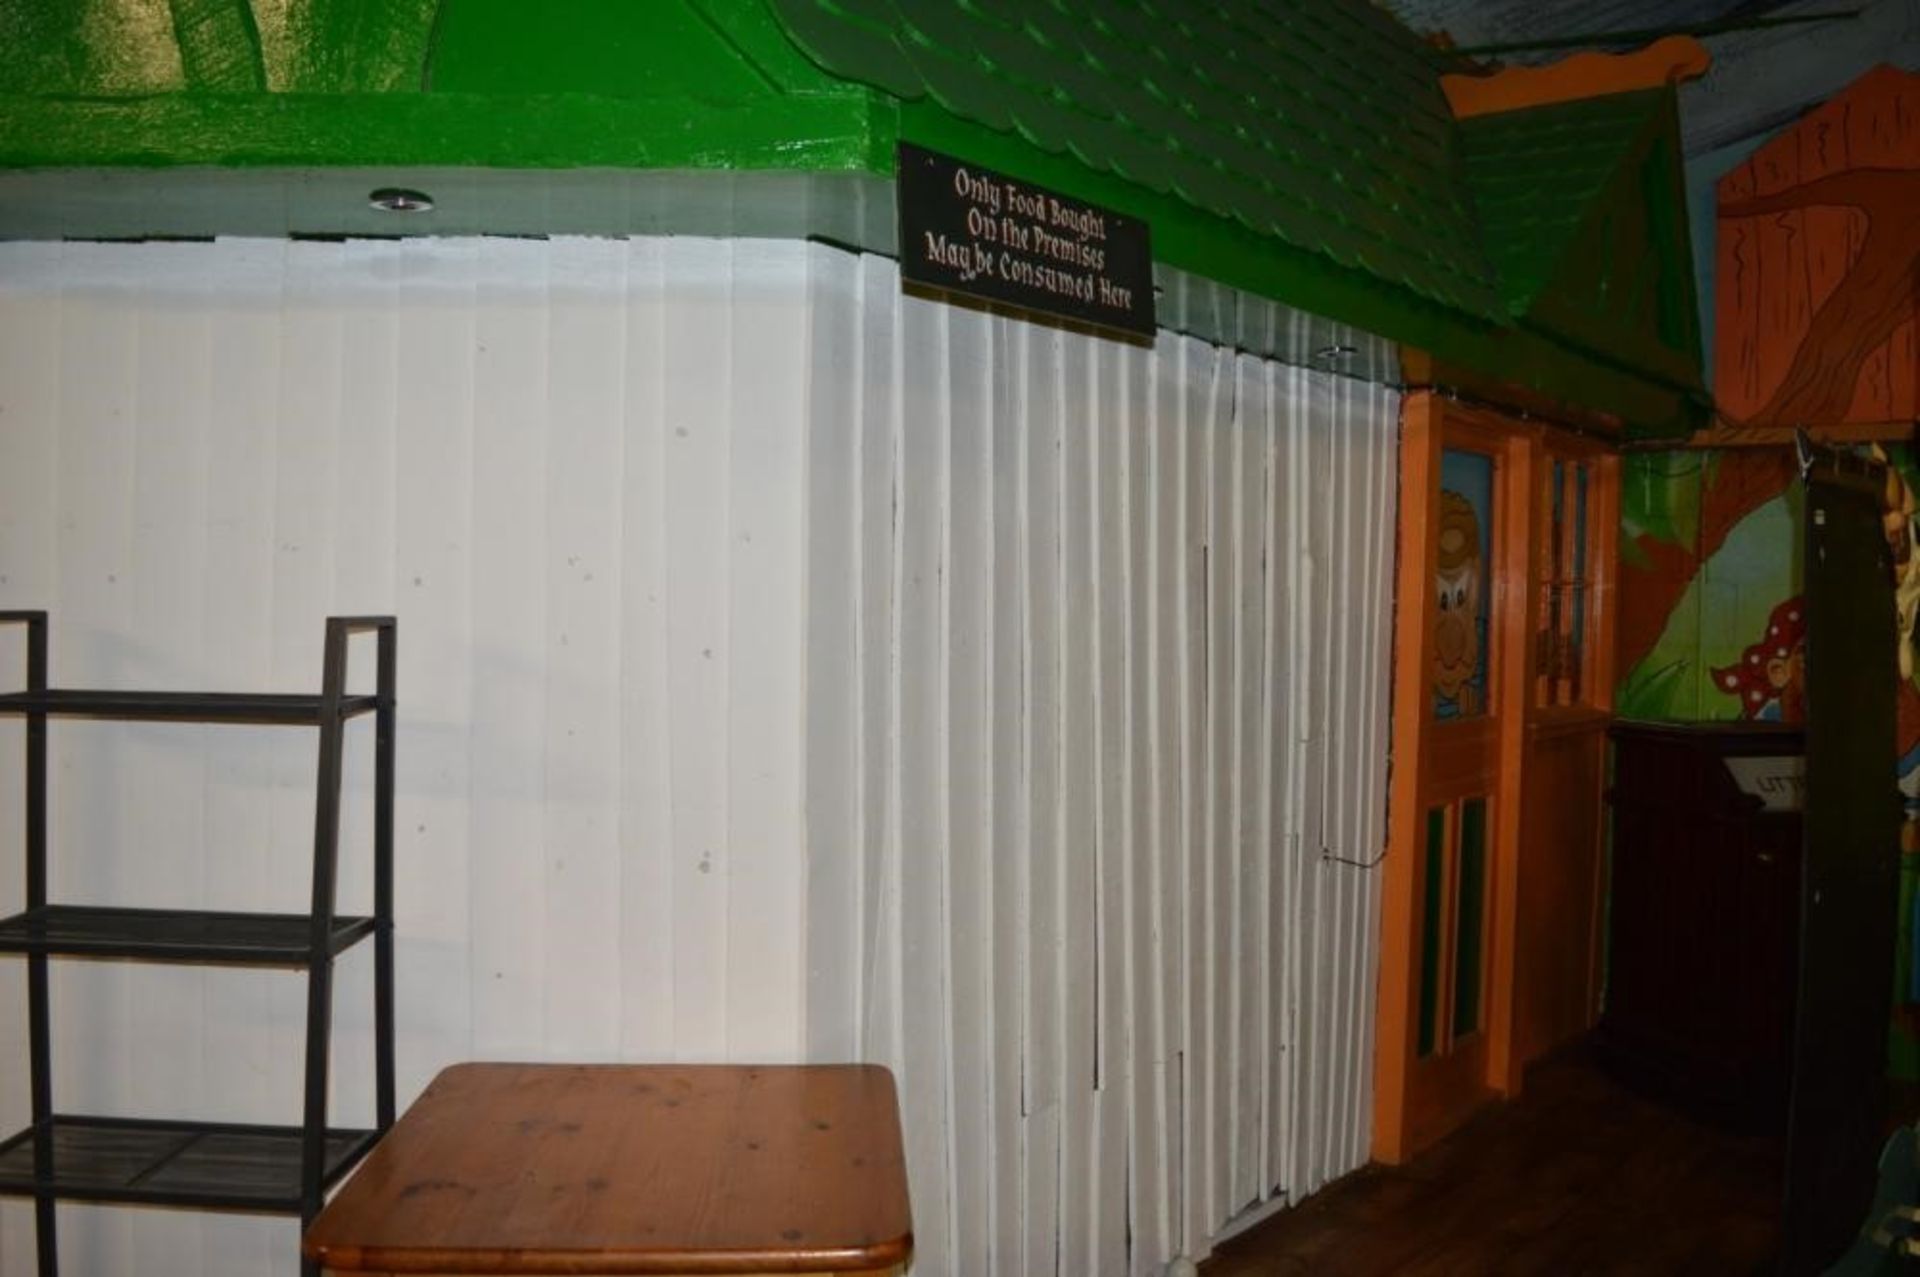 1 x Puddletown Pirates Bespoke Restaurant Kitchen Enclosure Hut With Serving Counter - Hut Dimension - Image 8 of 16